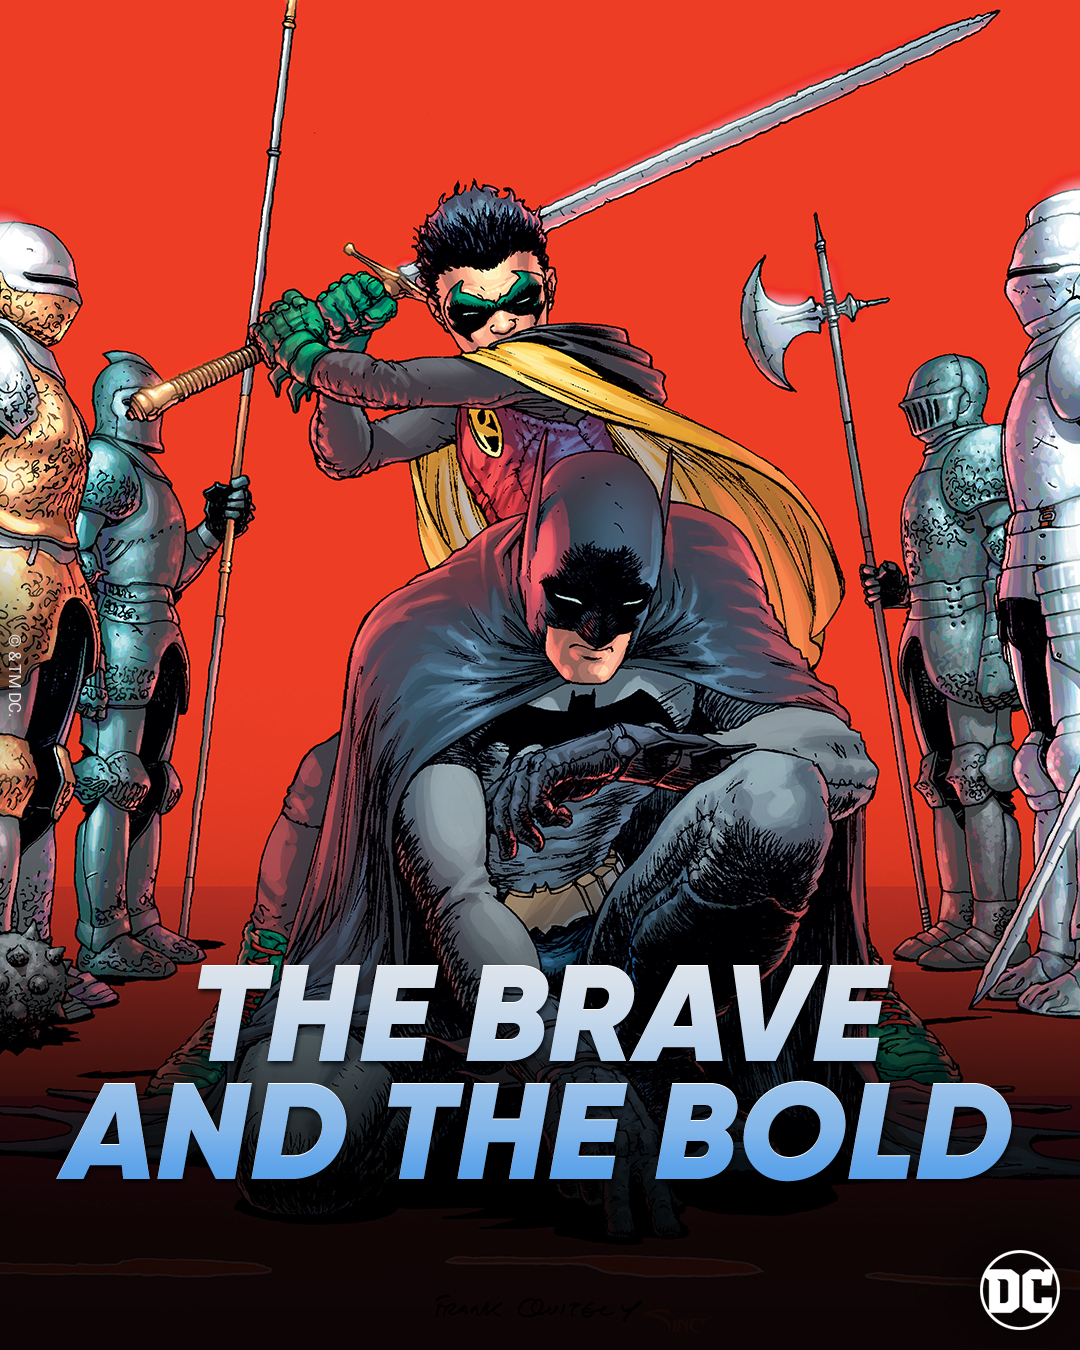 The Brave and the Bold, DC Extended Universe Wiki